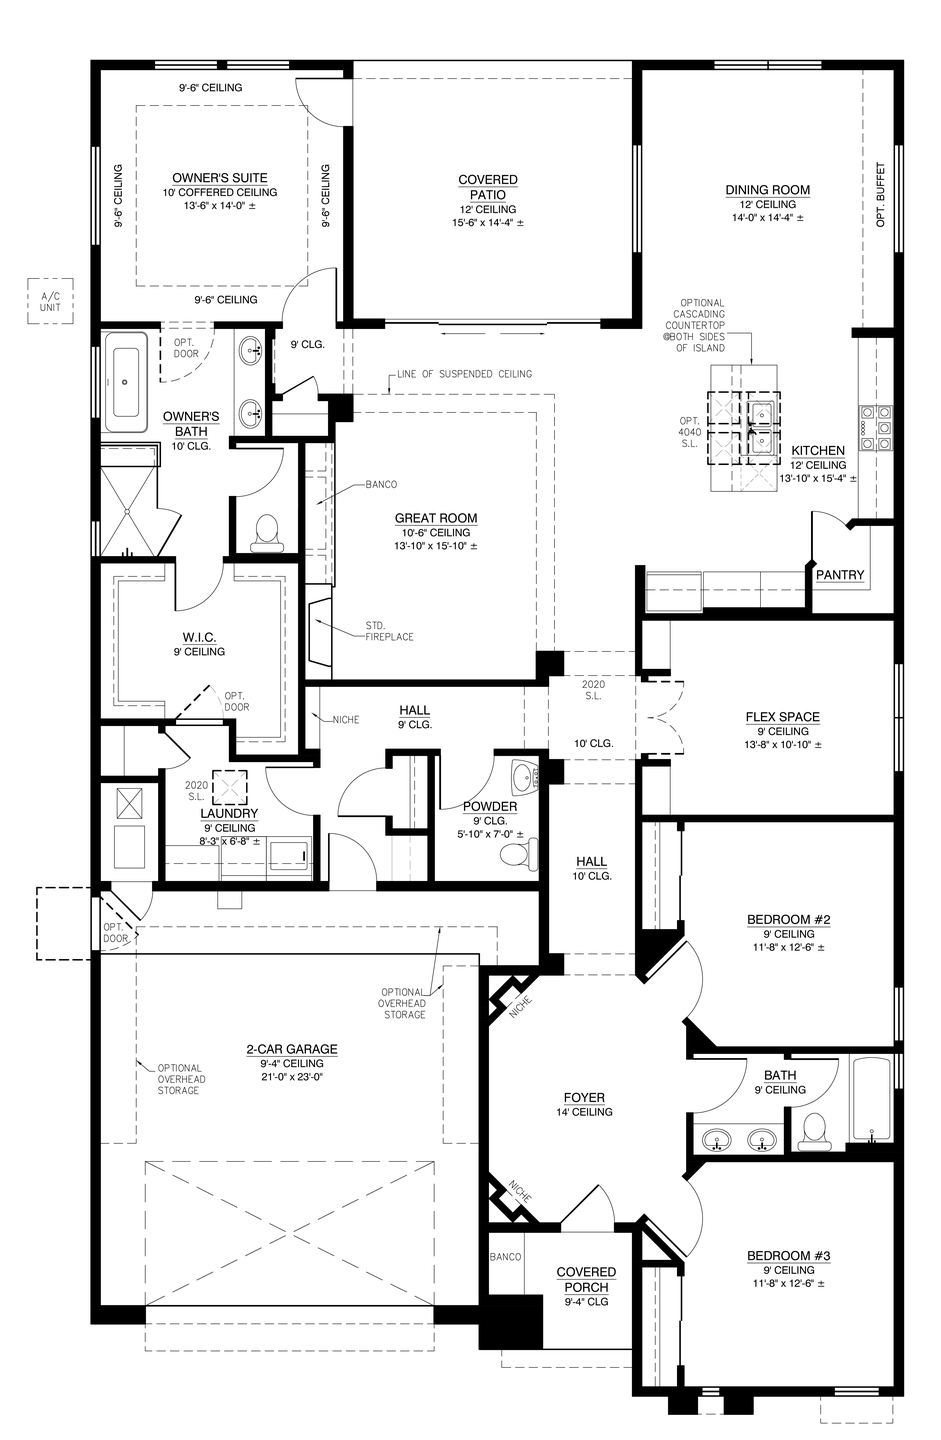 2,392sf New Home